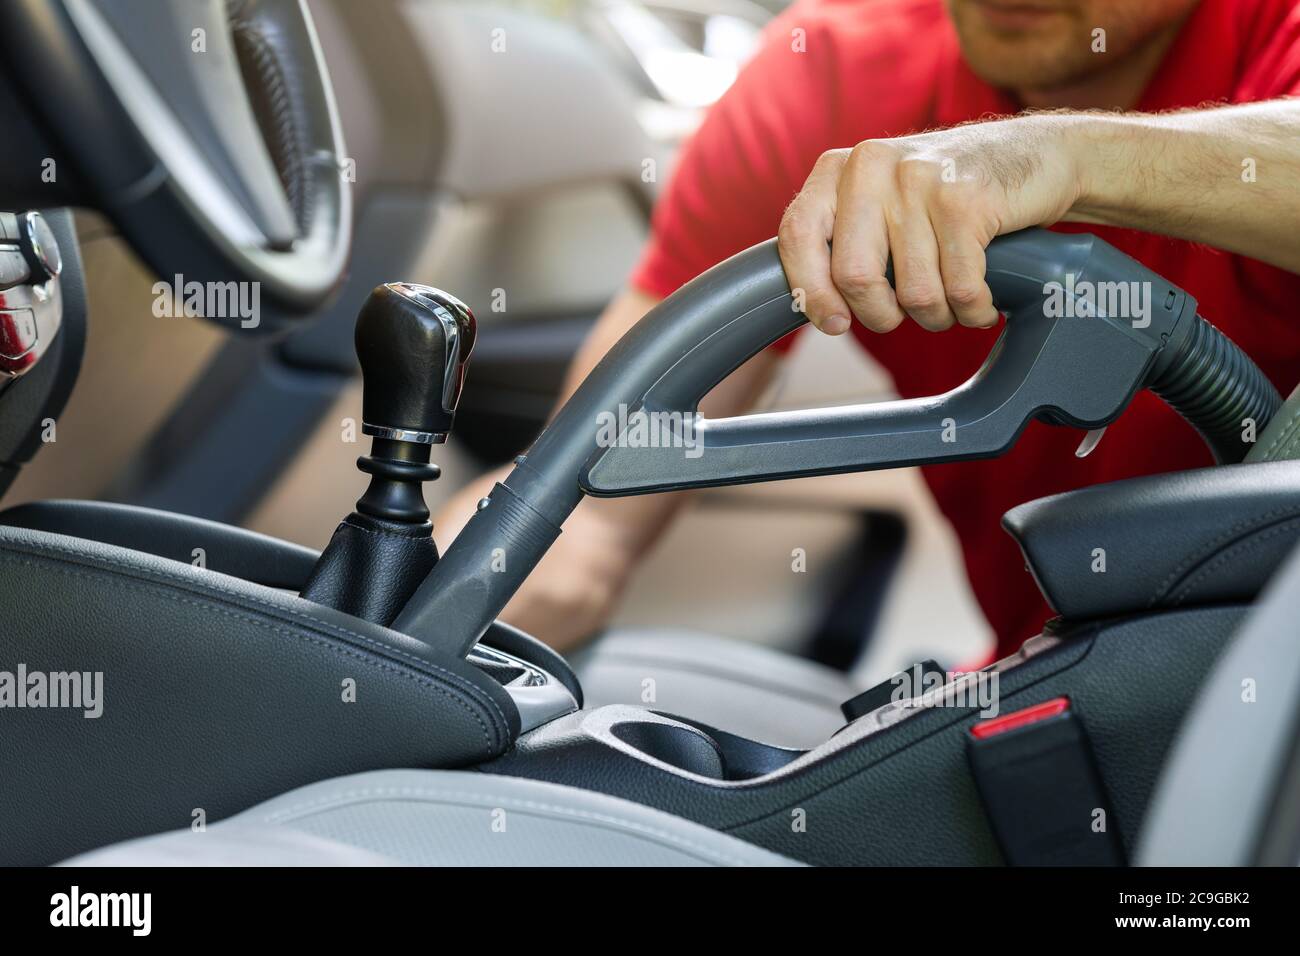 man cleaning car interior with vacuum cleaner Stock Photo